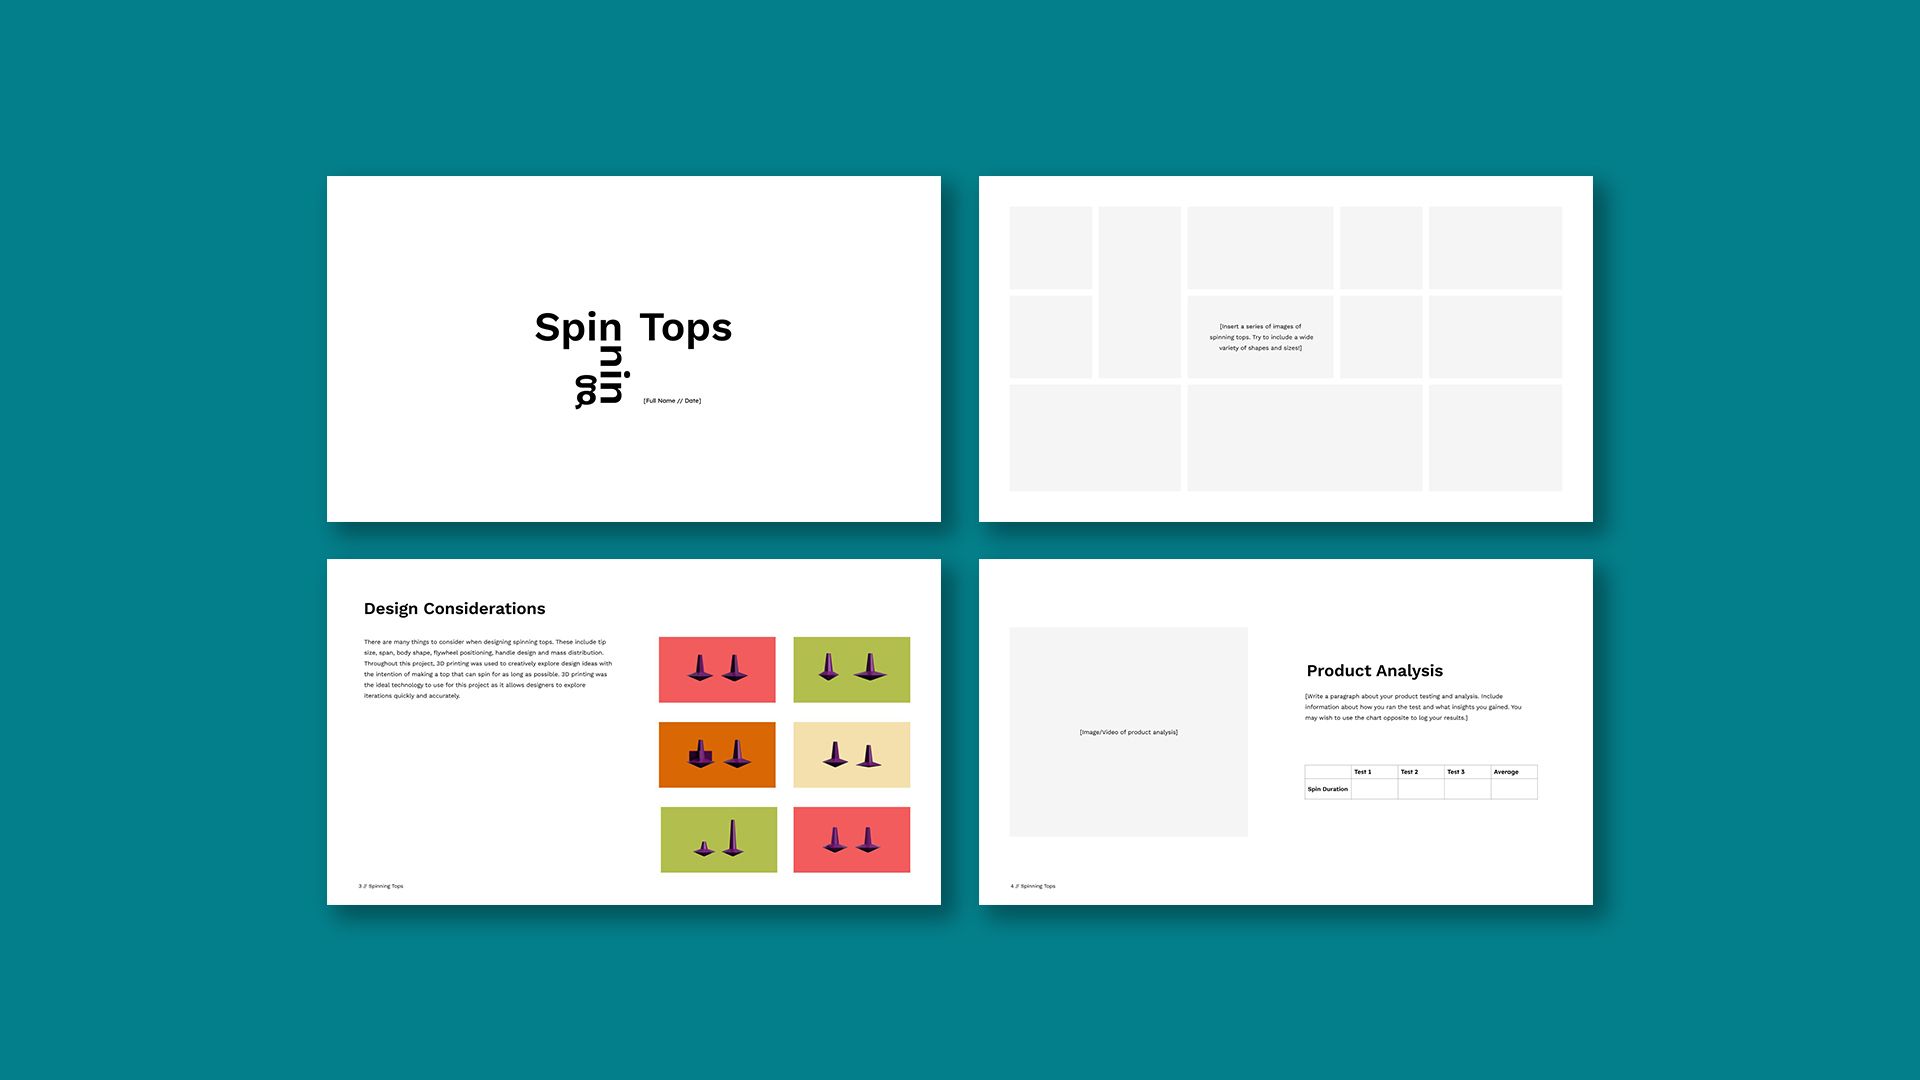 4 pages from PrintLab's spinning top project portfolio template.